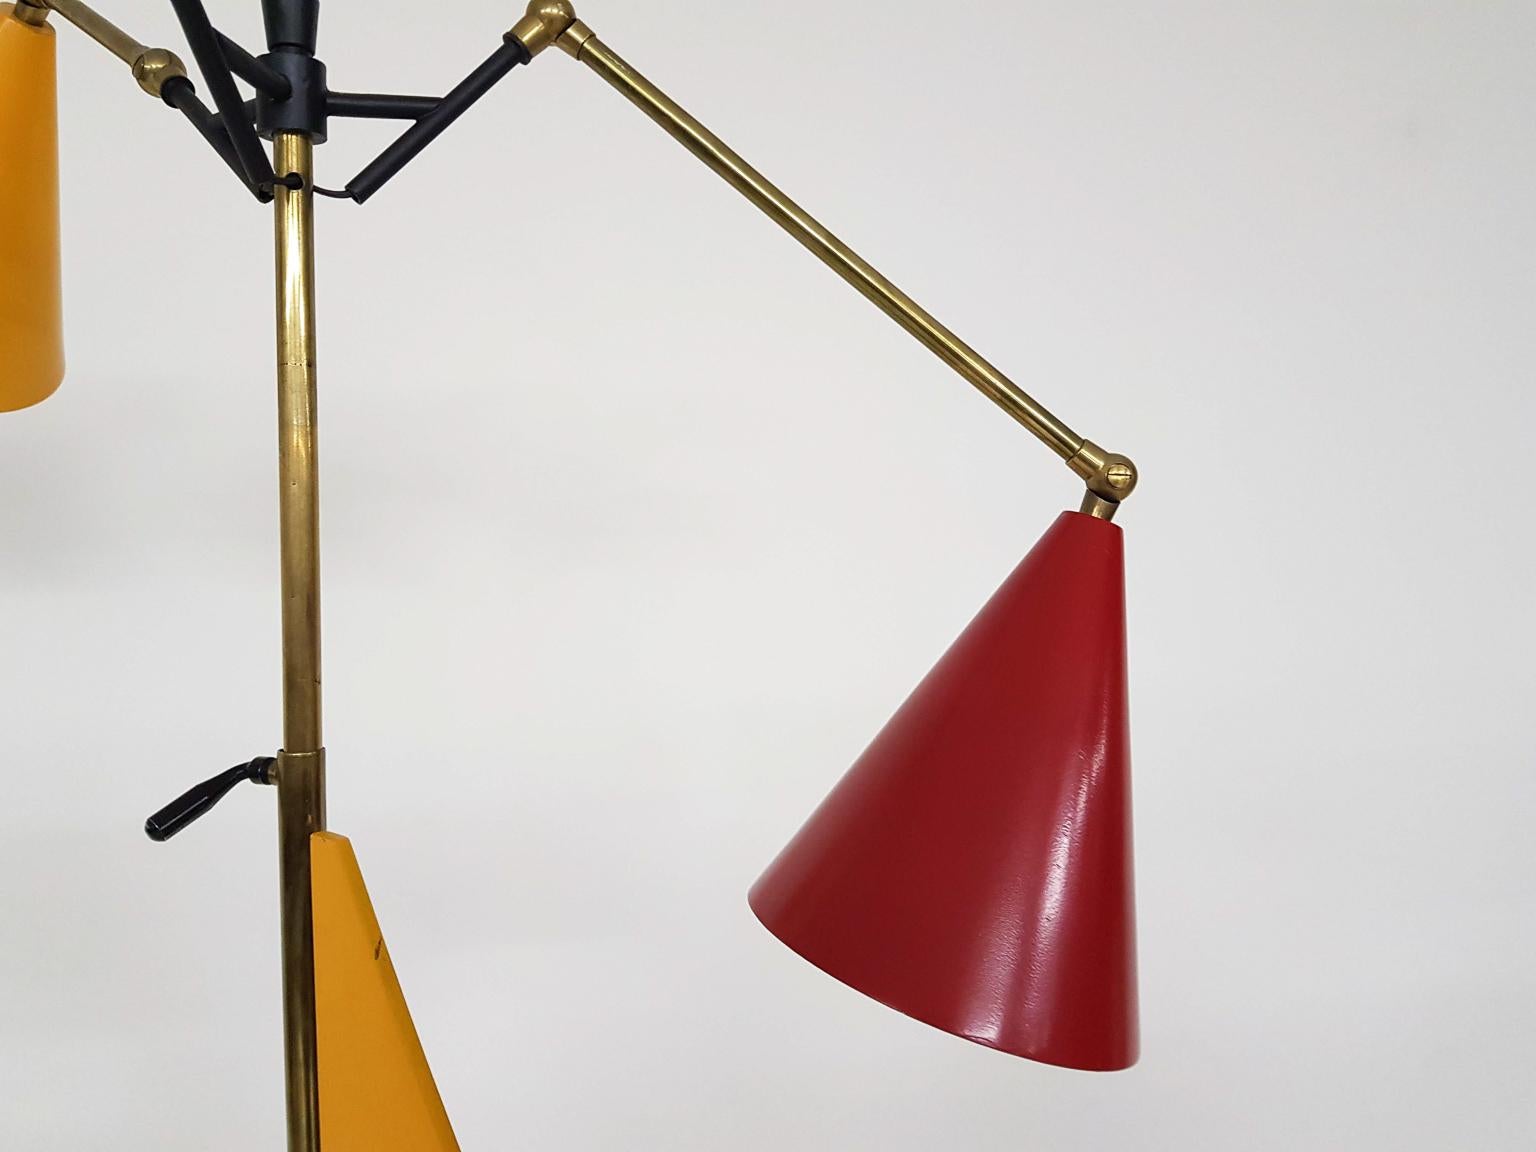 Exceptional Colorful Italian Midcentury Floor Light Attributed to Arredoluce For Sale 10